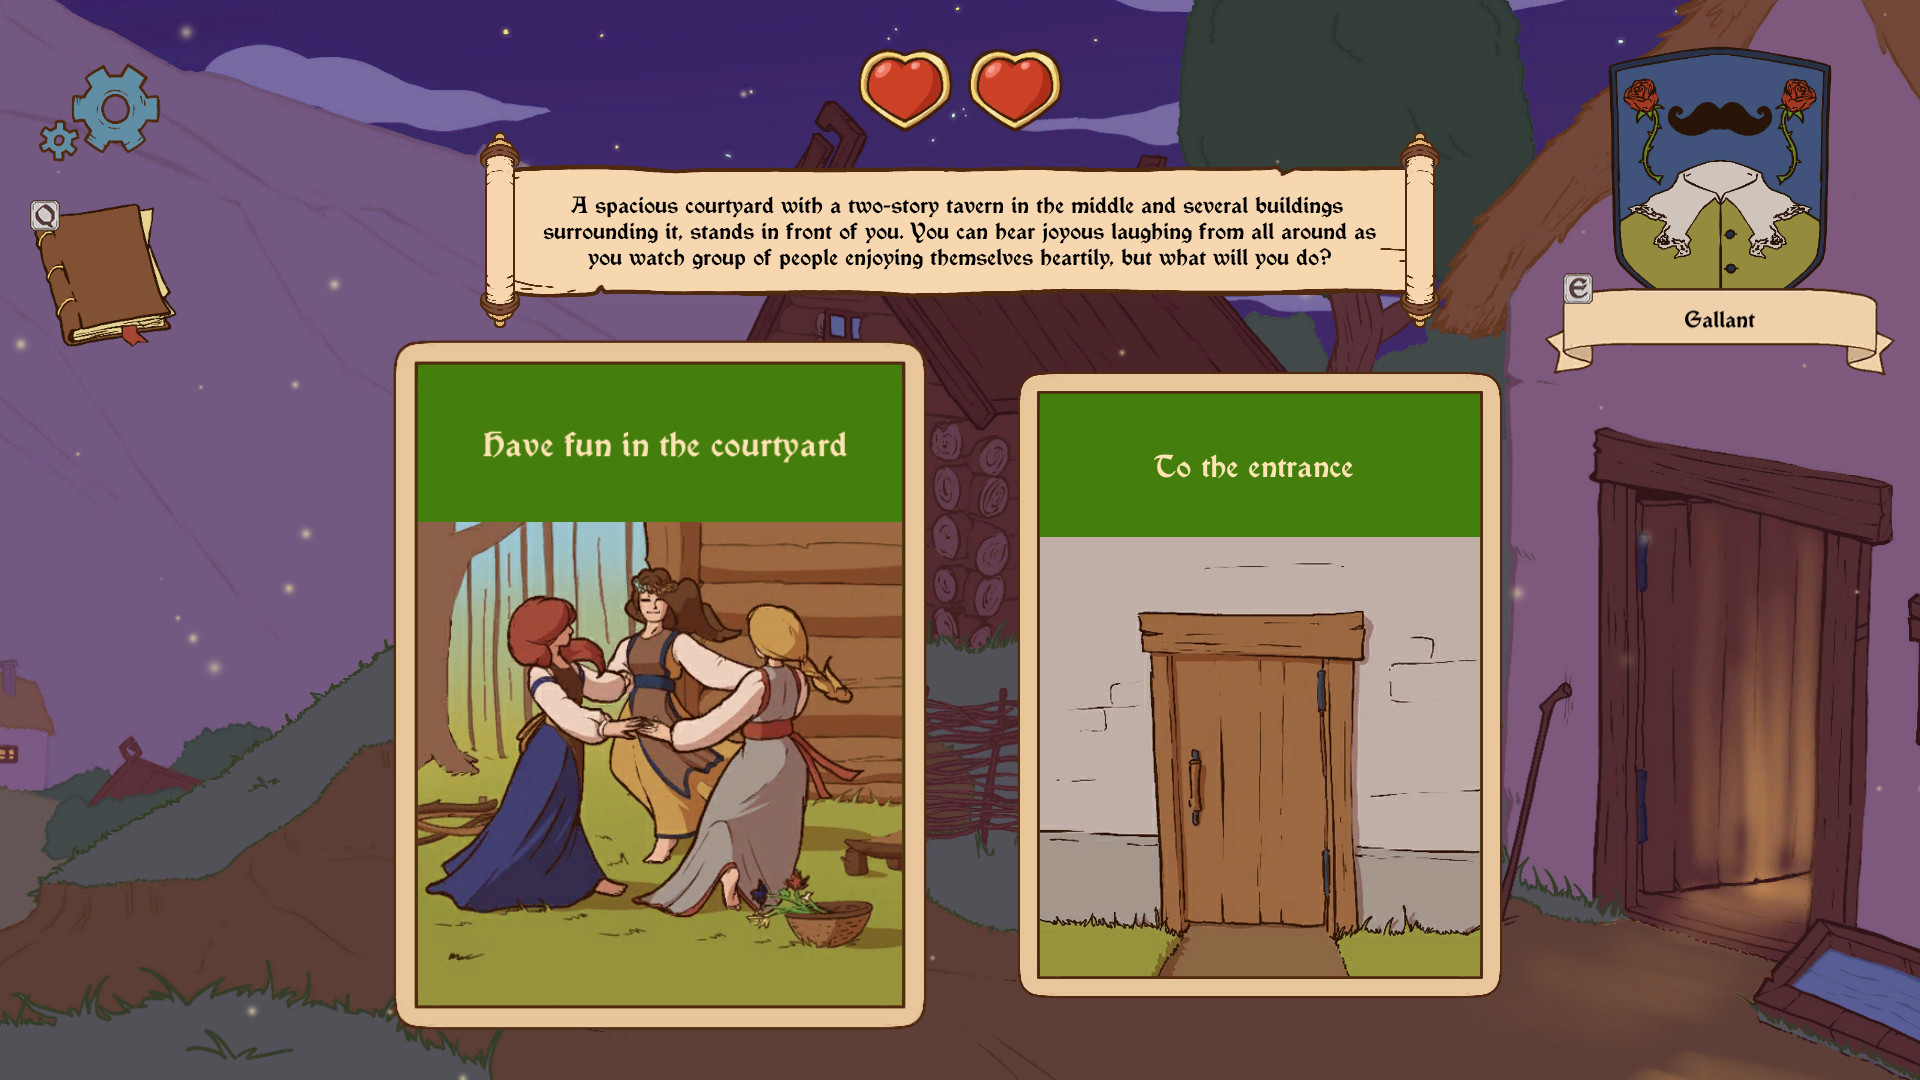 Choice of Life: Middle Ages 2 - Soundtrack Featured Screenshot #1